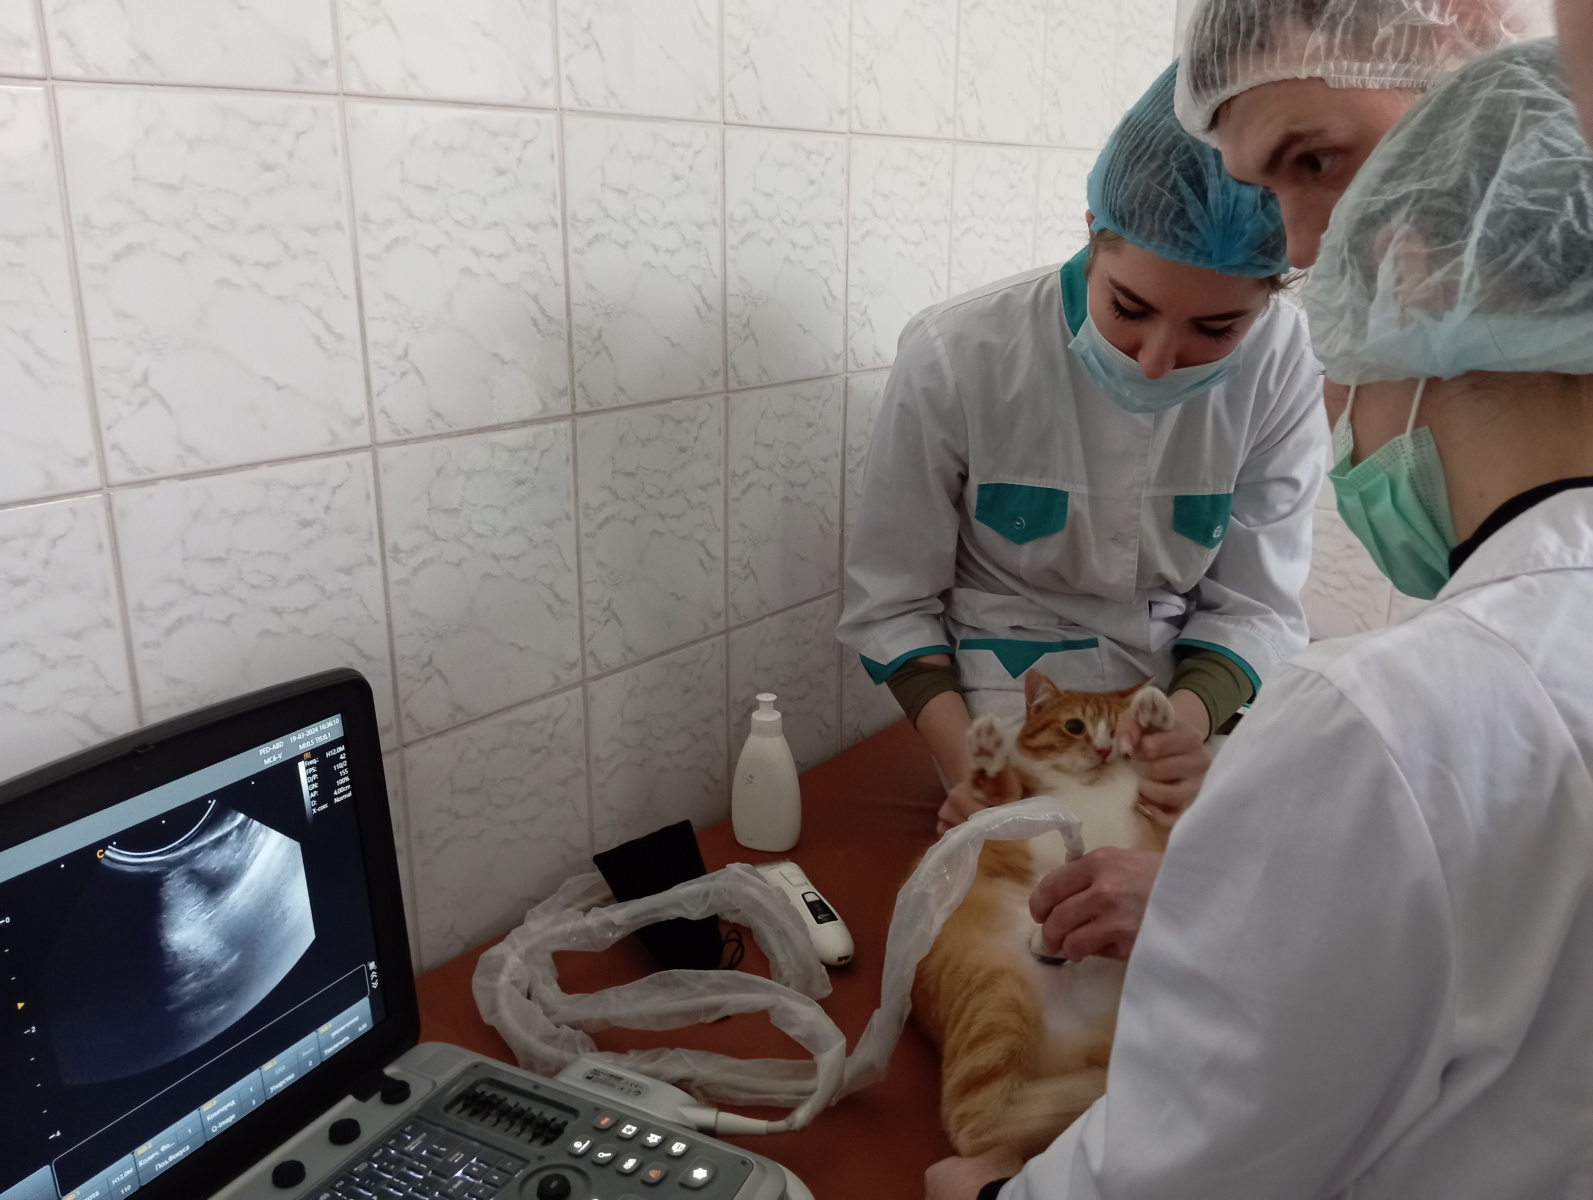 IAEFS students performed ultrasound examinations on pets